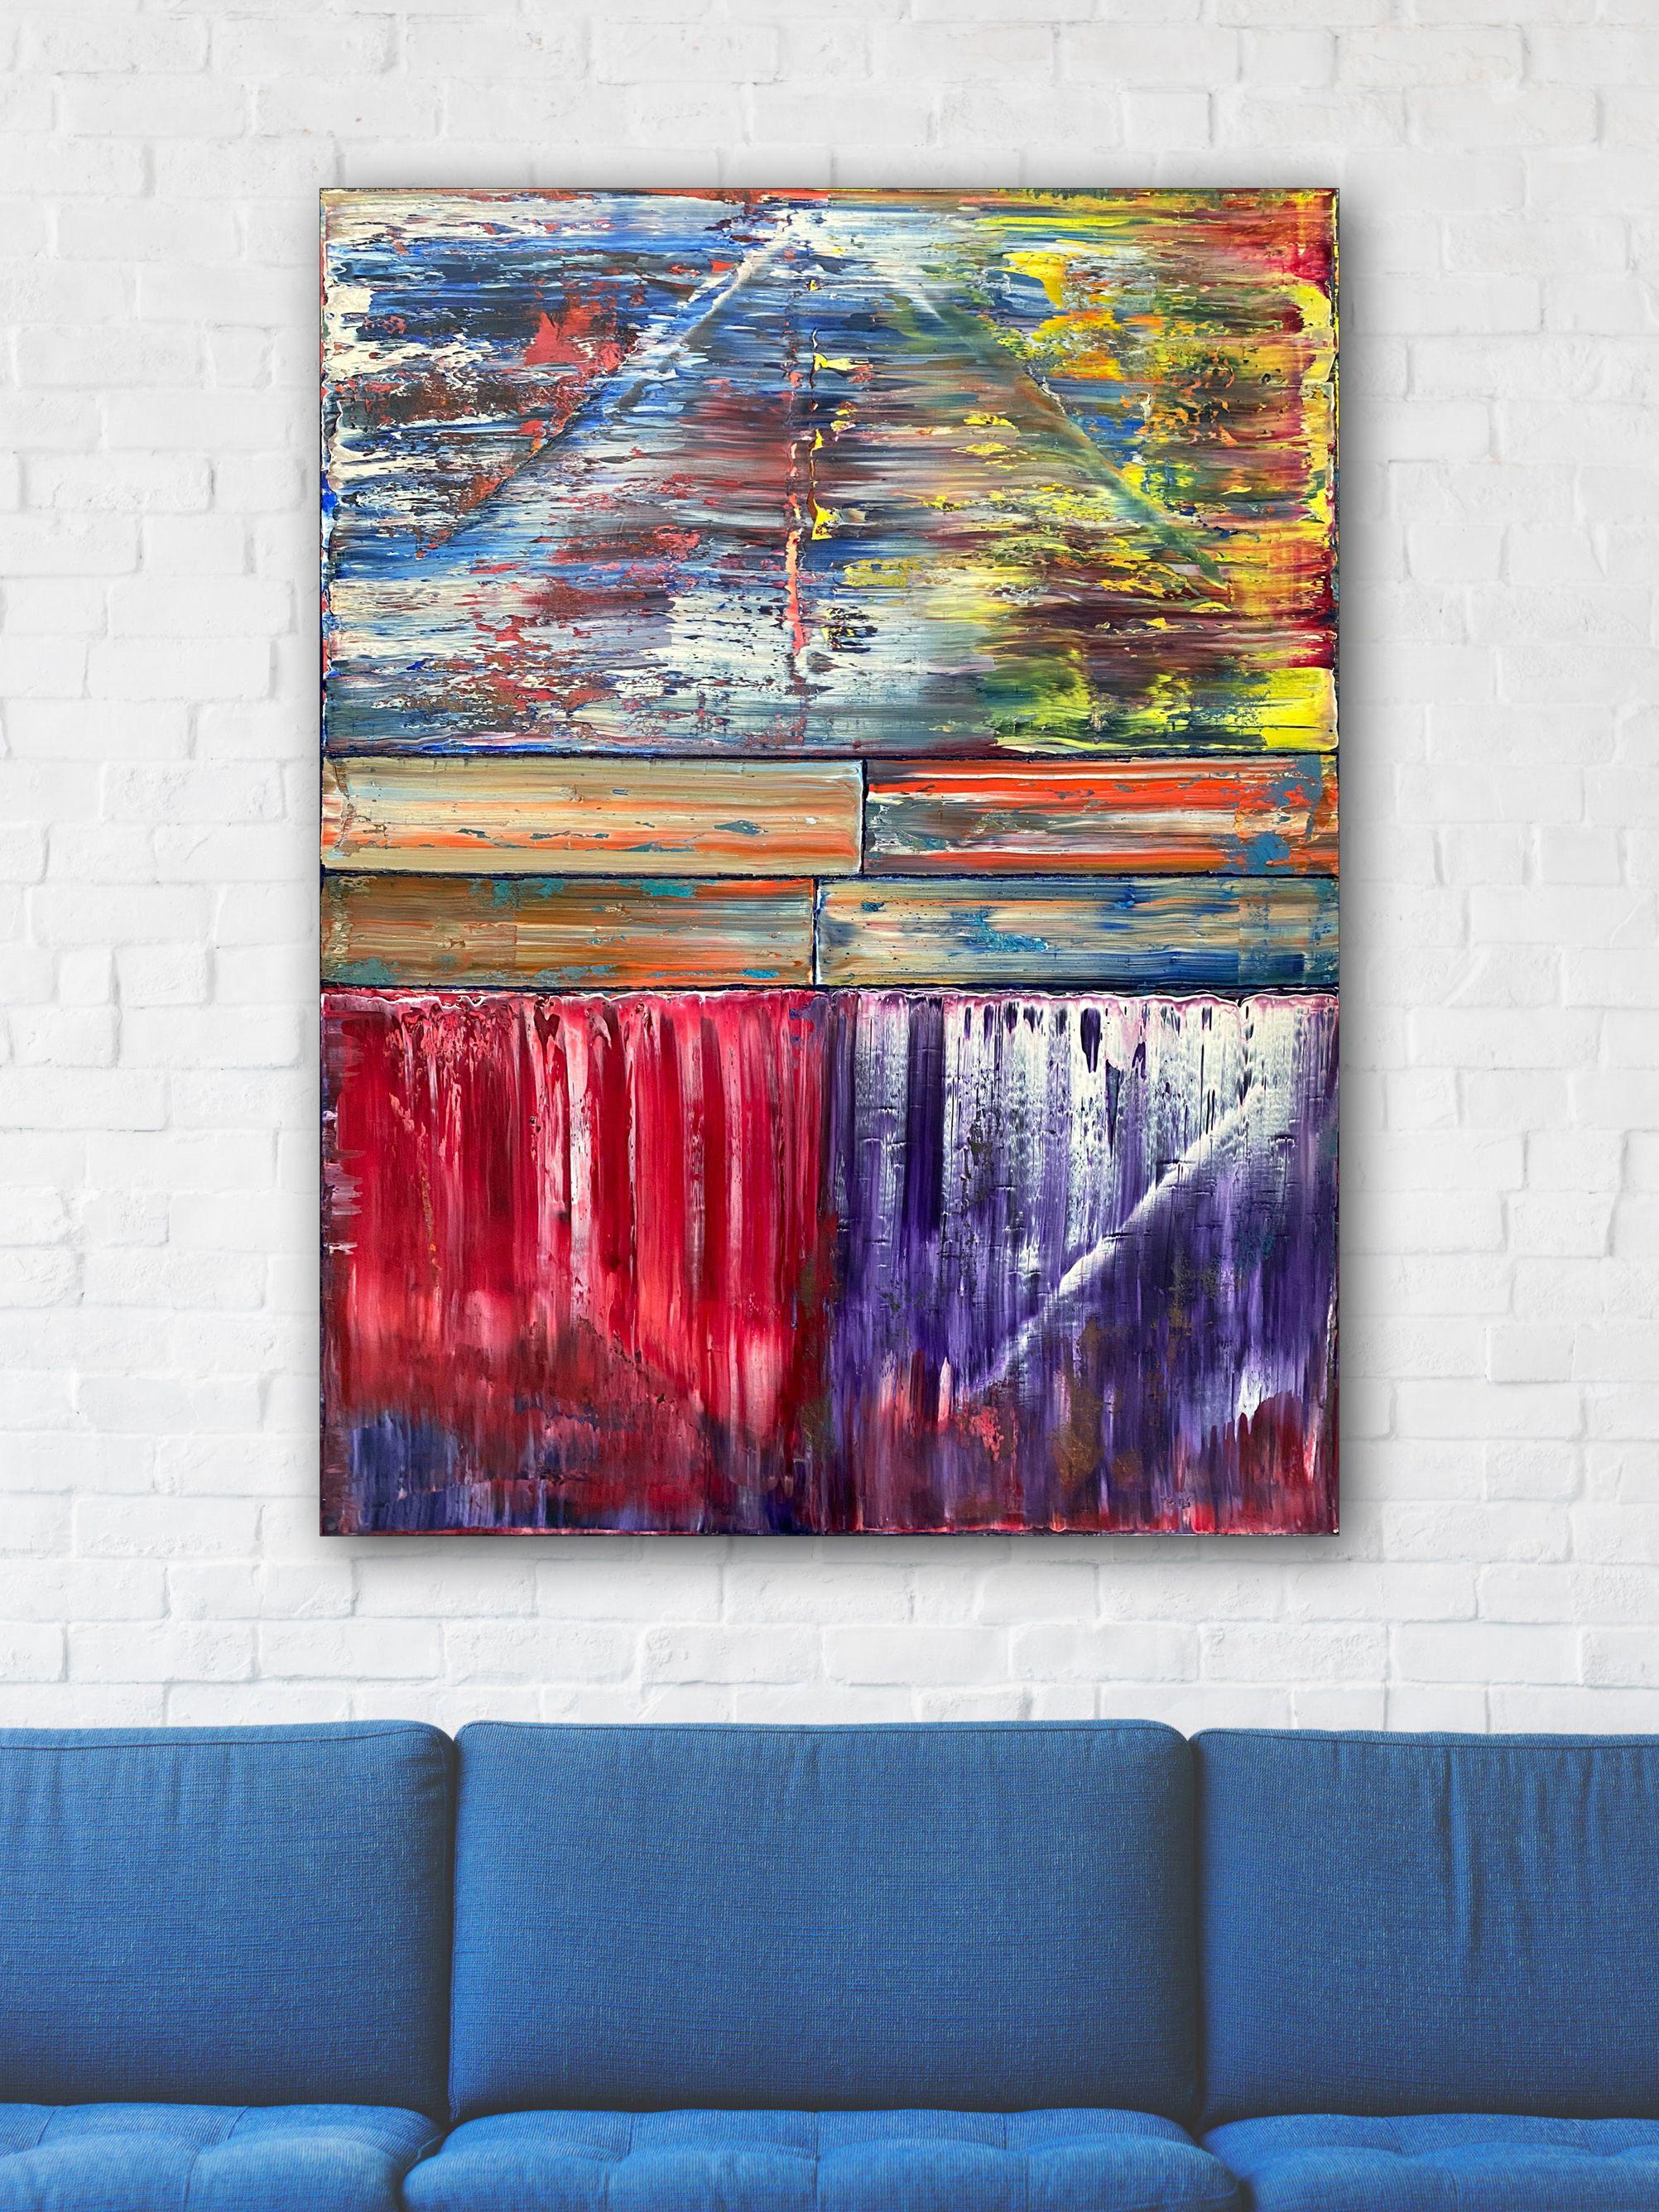 This is a completely unique and original large PMS abstract oil painting on canvas. Perfect for your living room, or to fill any large wall in your office or home. This painting epitomizes a technique and aesthetic I have been working to perfect